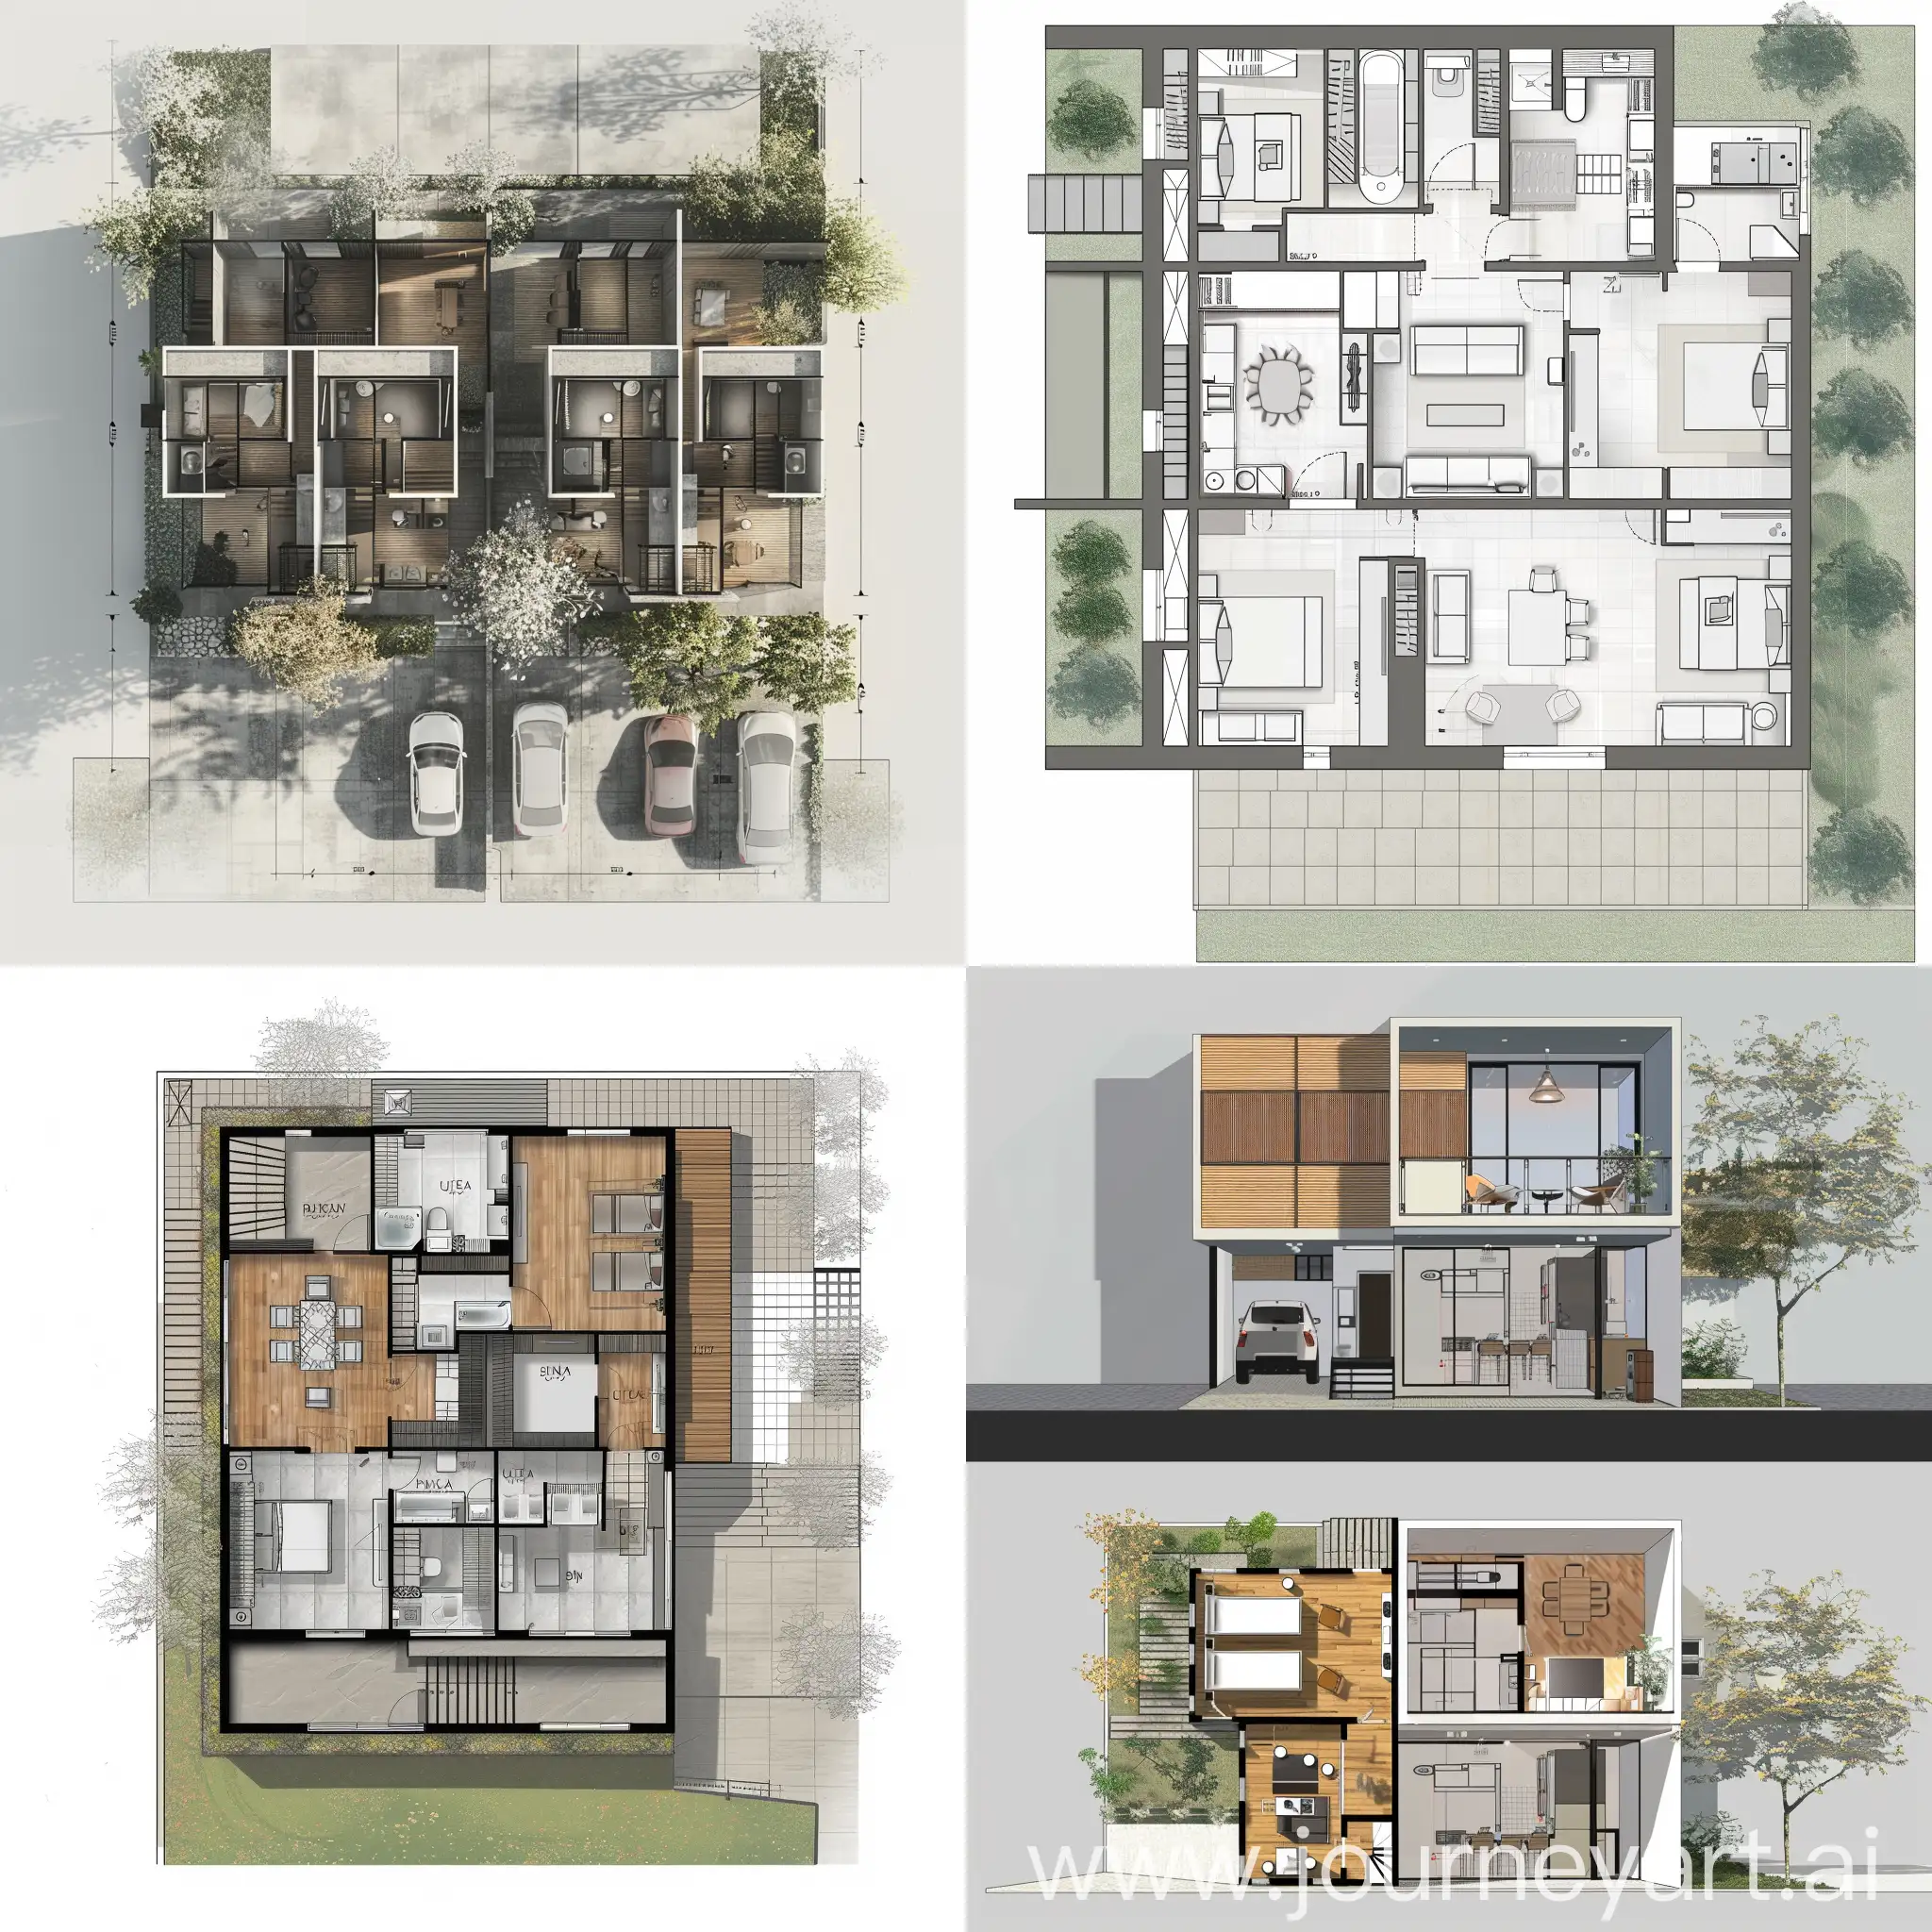 Efficient-Front-Facade-Floor-Plan-with-Increased-Units